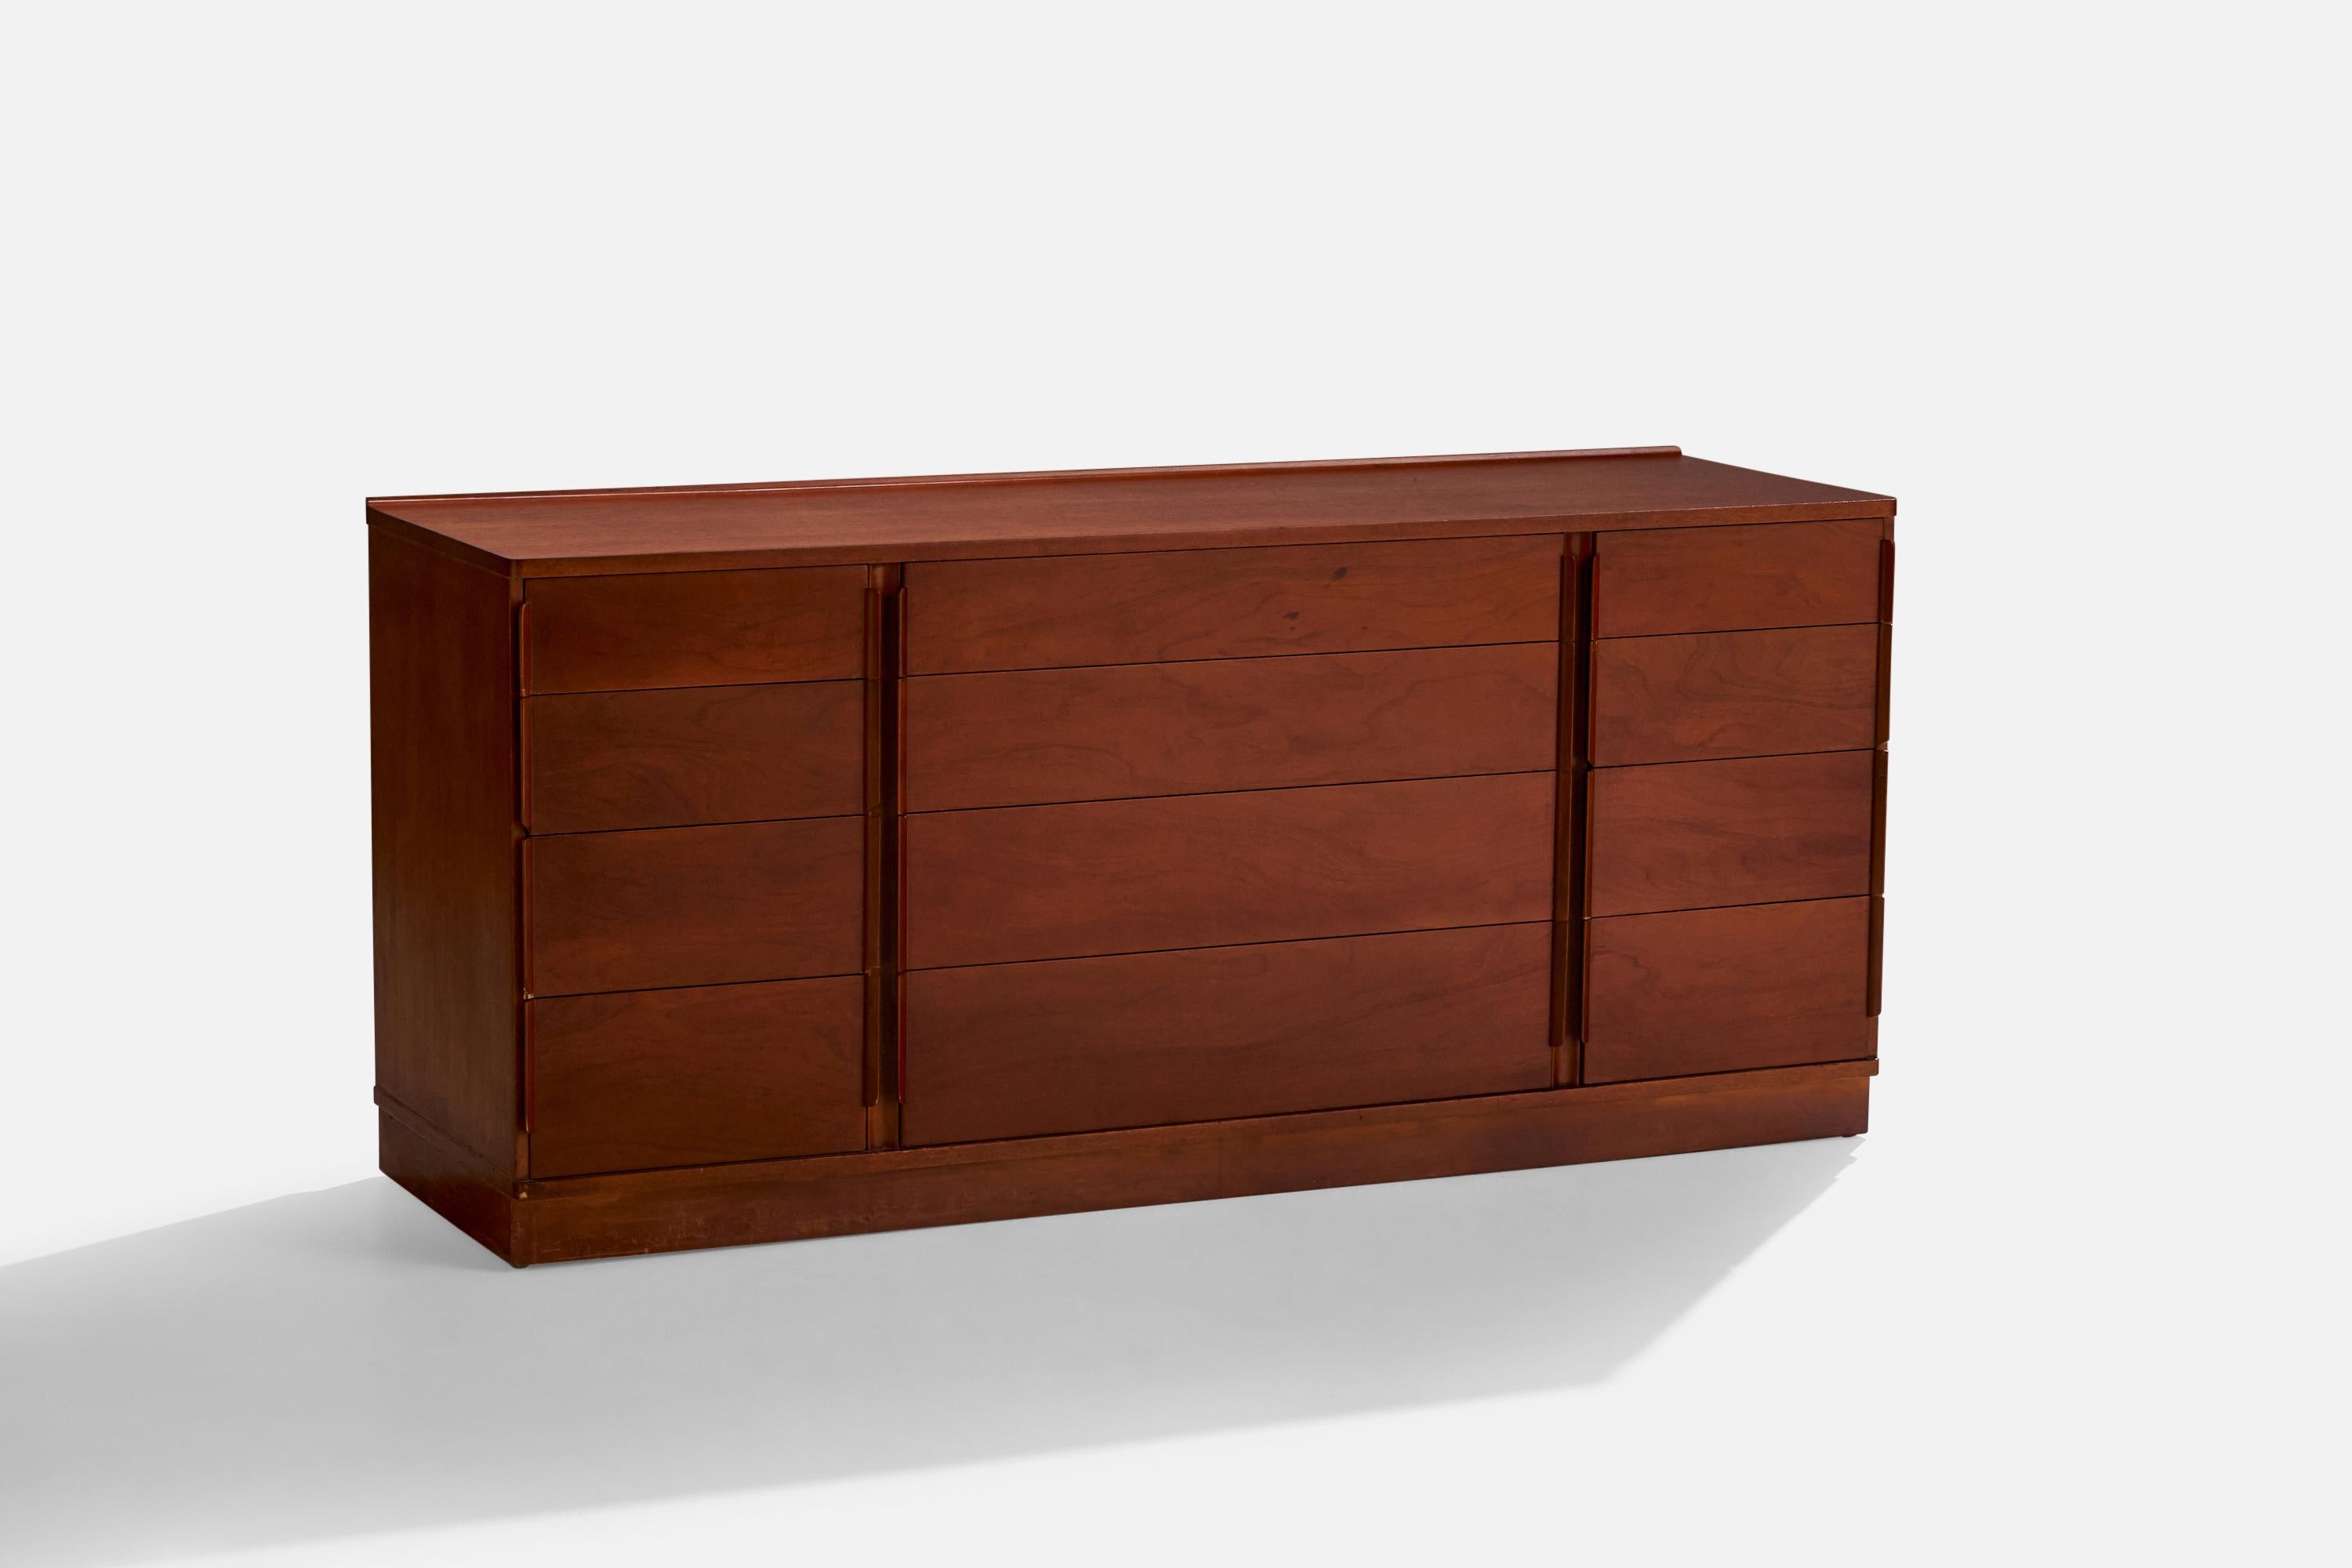 A mahogany chest of drawers or dresser, designed by Edward Wormley and produced by Dunbar, Indiana, USA, c. 1950s.